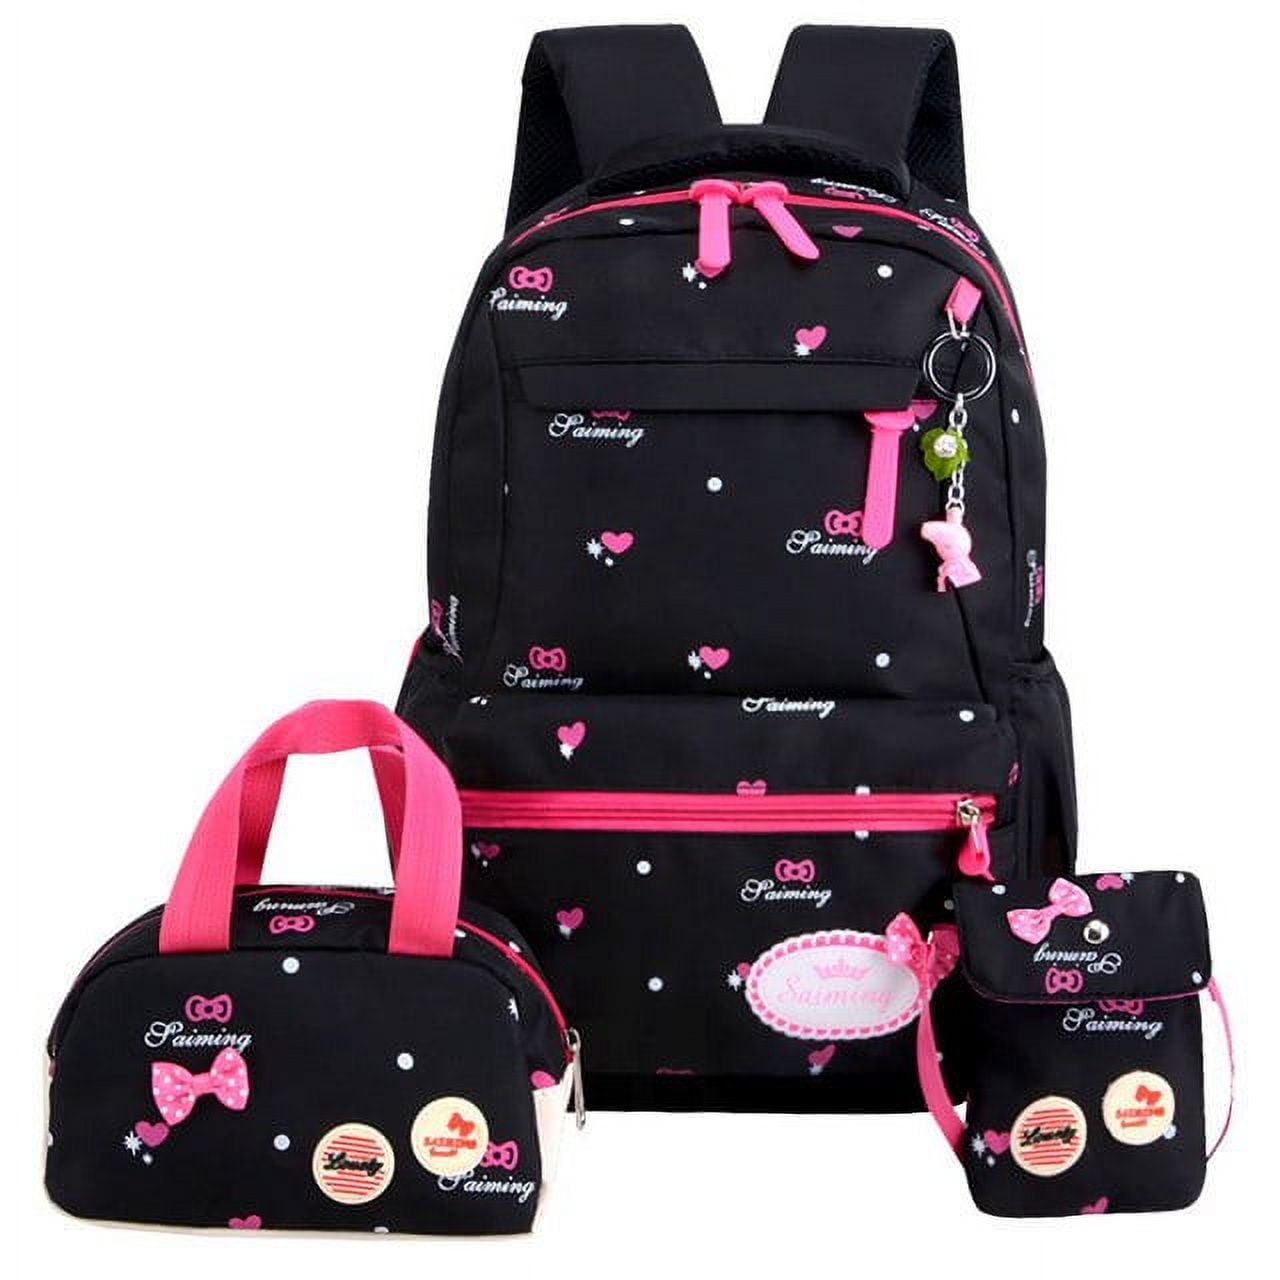 Sprayground Backpack One Piece  One Piece Accessories Backpack - Students  School - Aliexpress